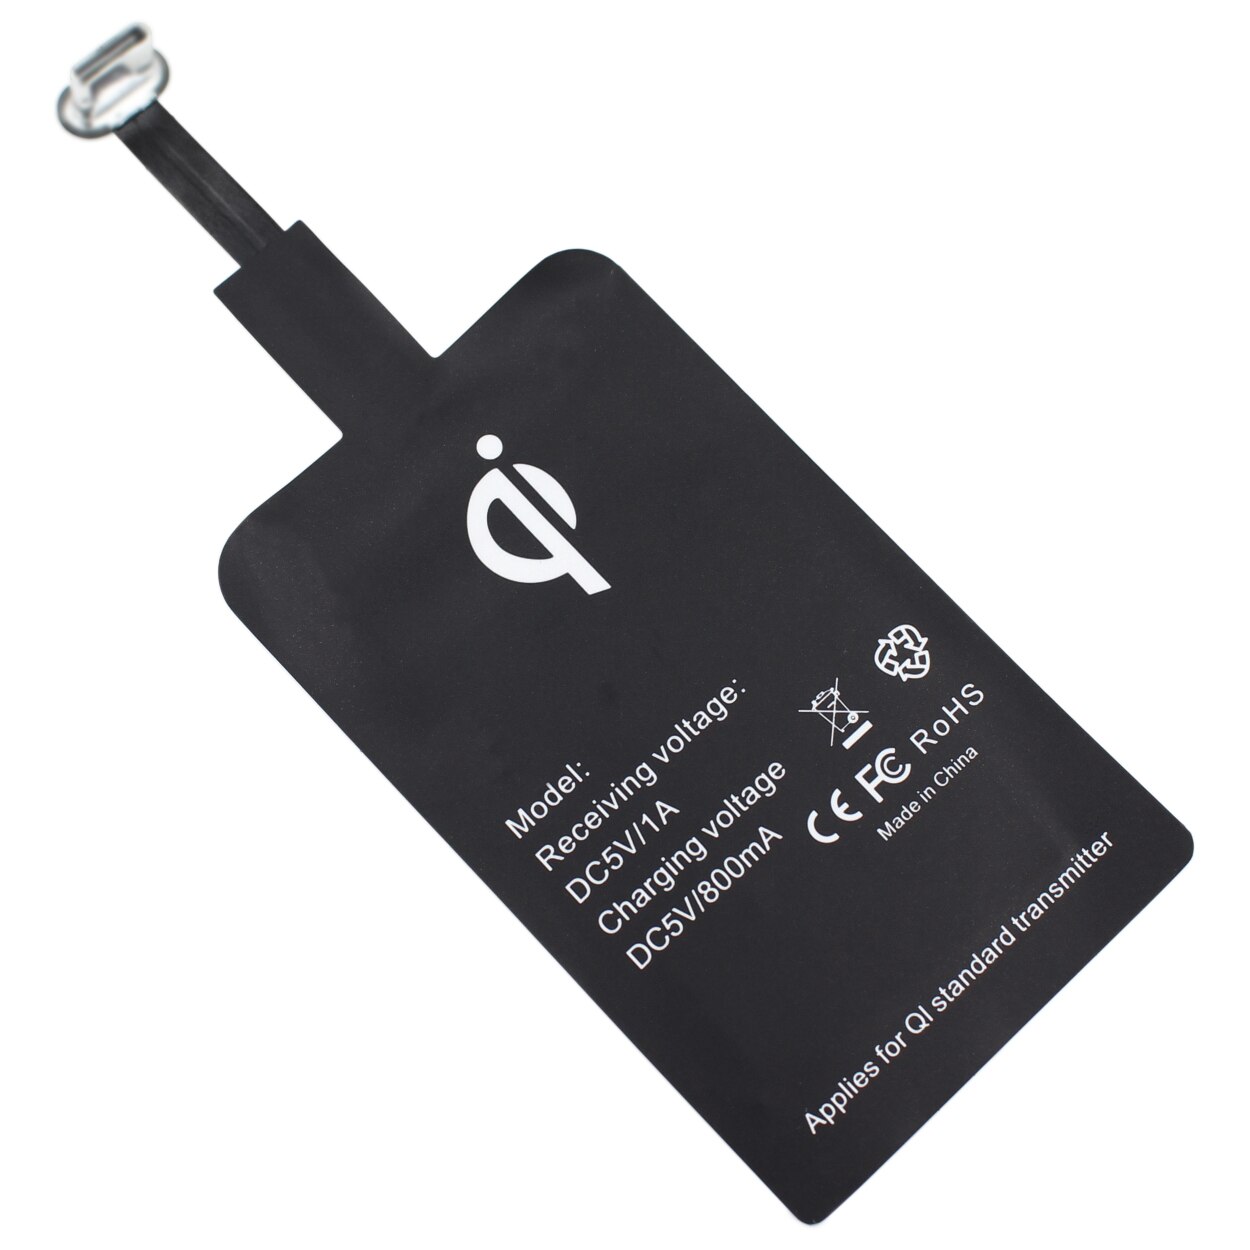 Qi Draadloos Opladen Receiver Charger Module Voor Samsung Galaxy A3 A5 A7 C7 , C10, c5 C7 C9 Pro C9000